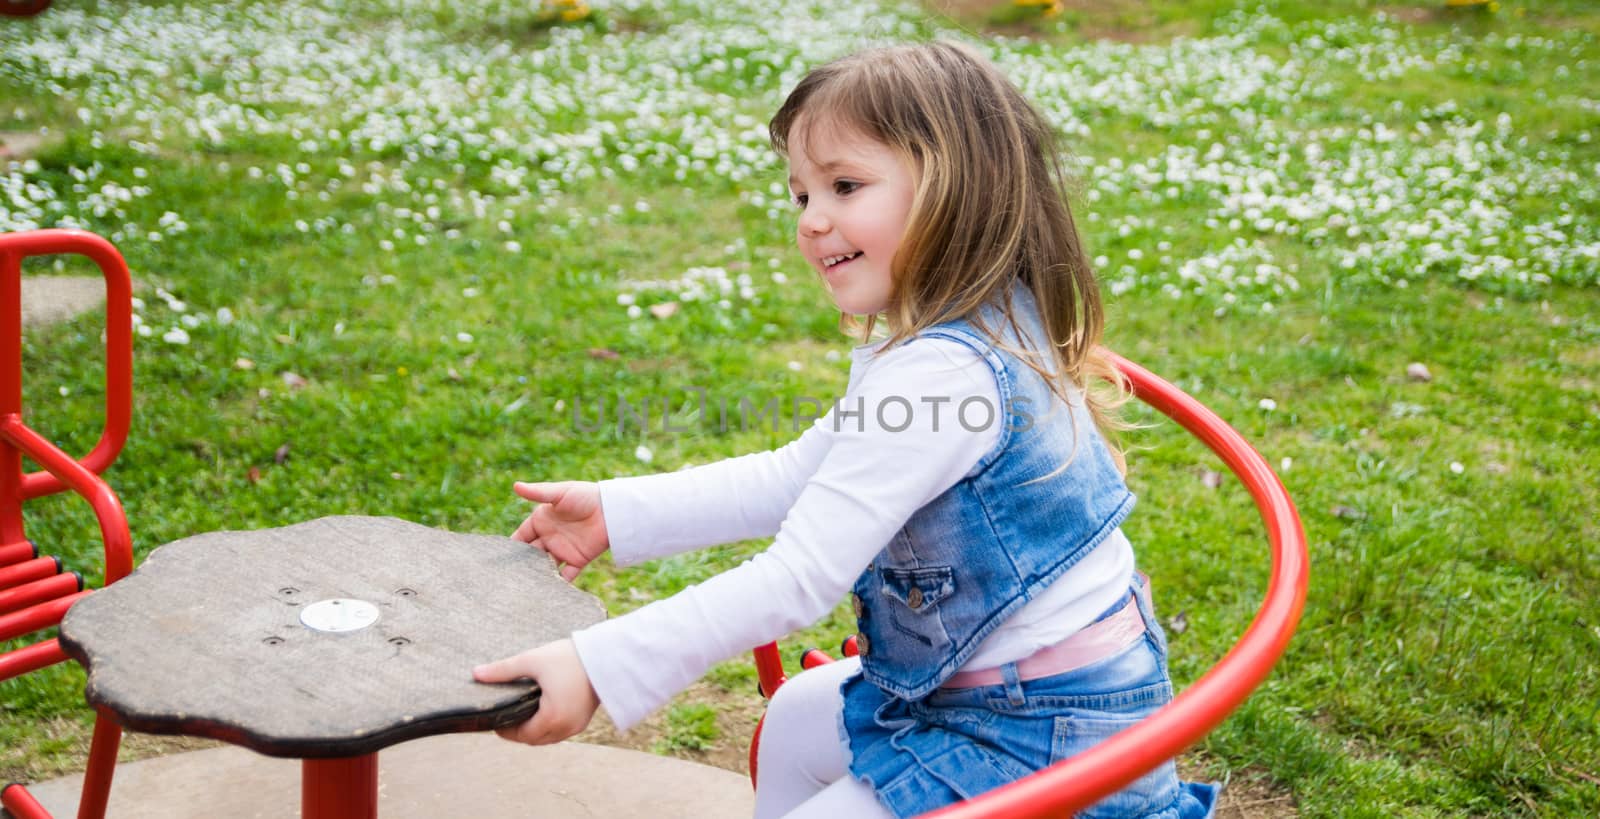 little girl turns into a manual carousel in an outdoor playground